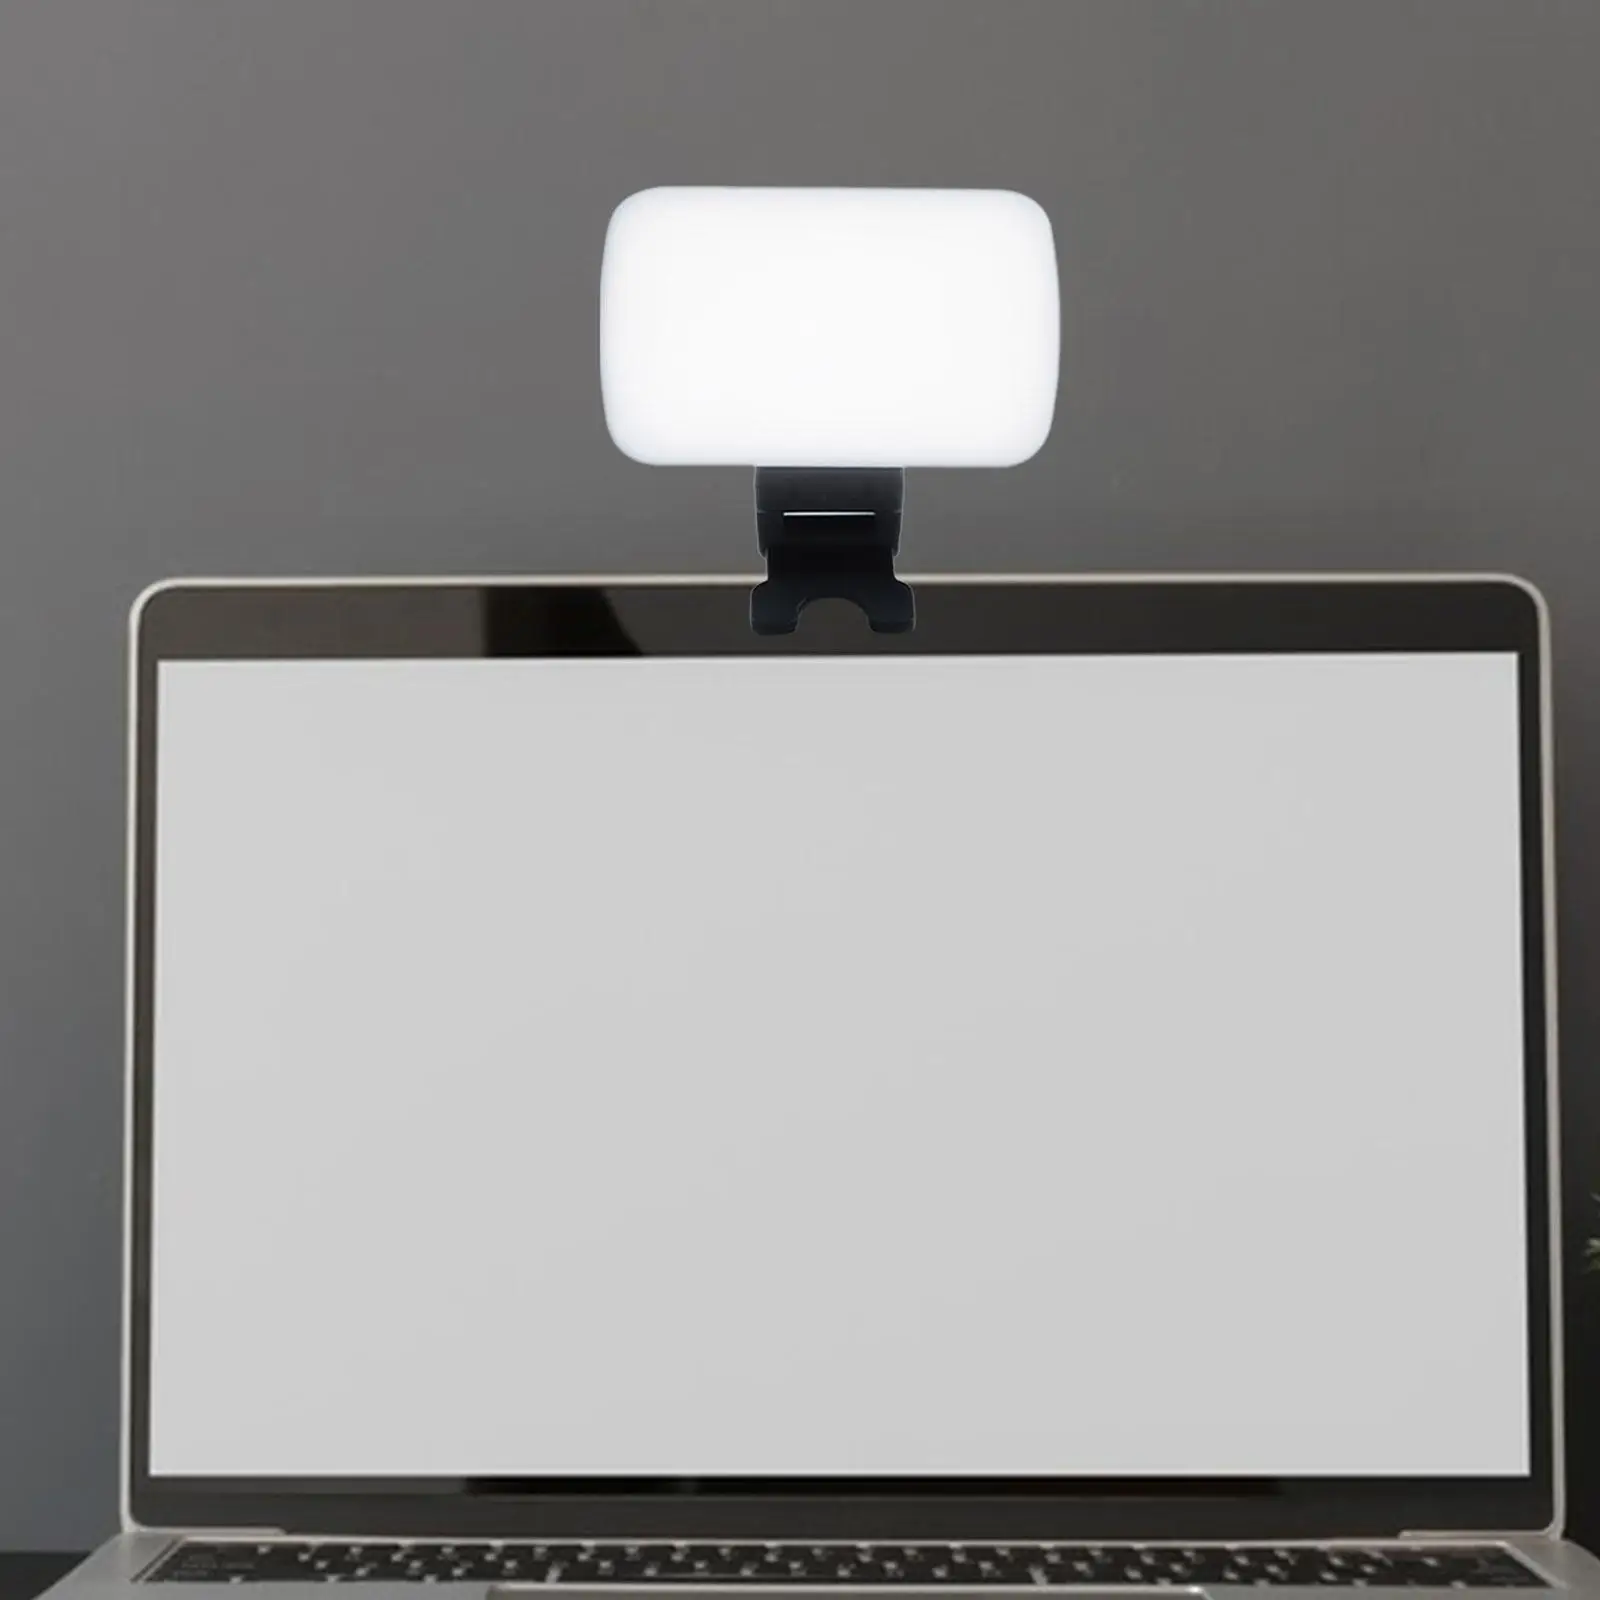 Panel Lights 2 Light Modes Photography Lights Pocket Photo Light LED Fill Lamp for Remote Working Live Video Recording